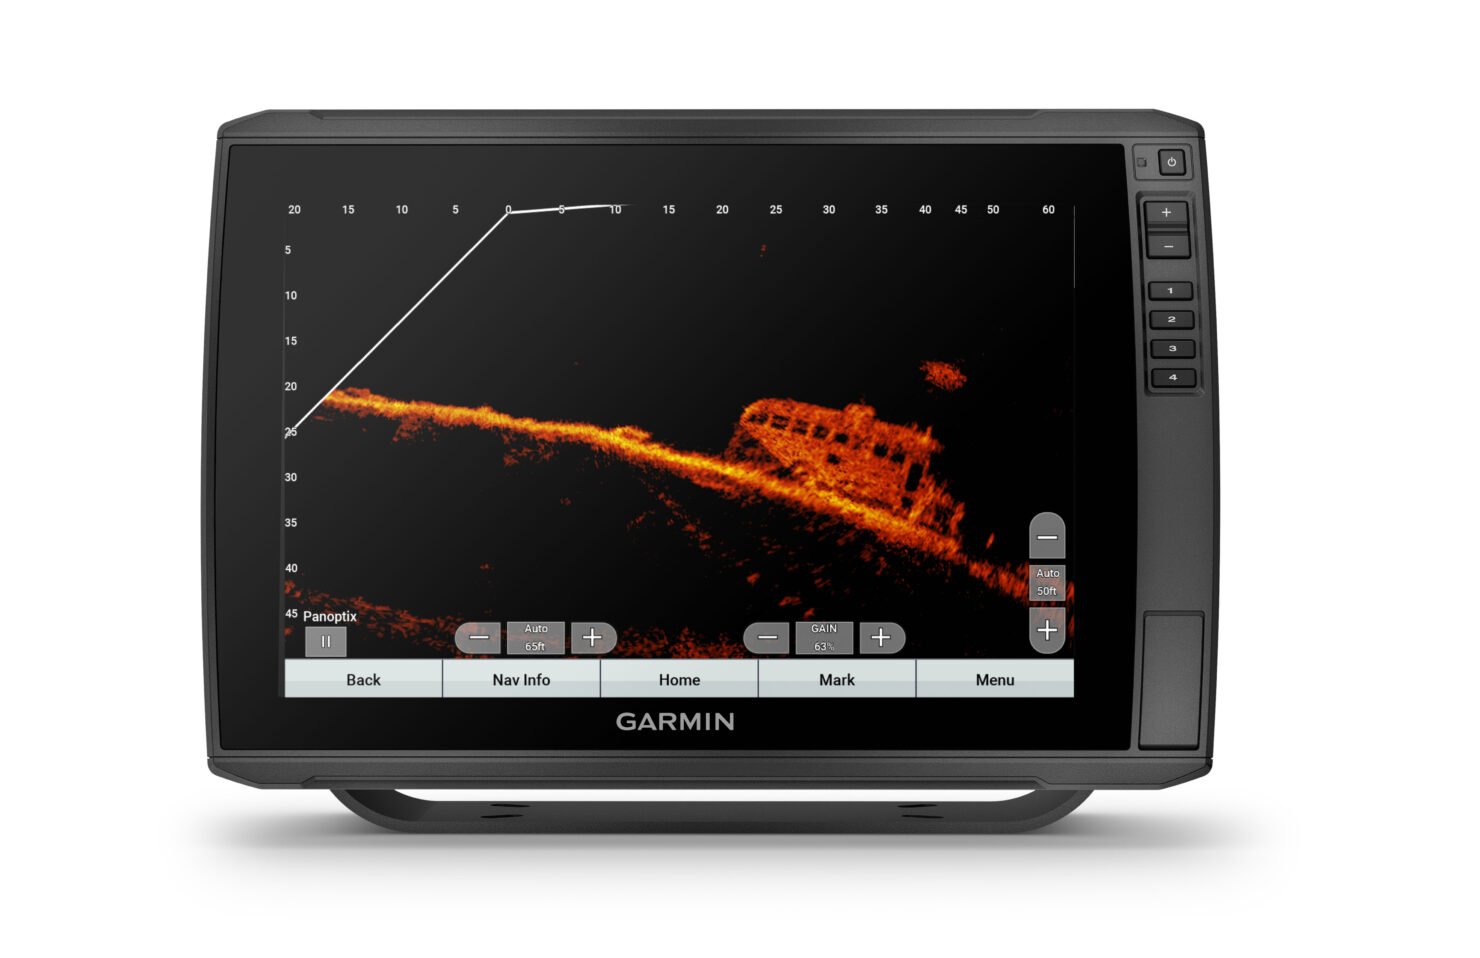 Find More Fish: Garmin LiveScope Plus Brings Frozen Lakes to Life